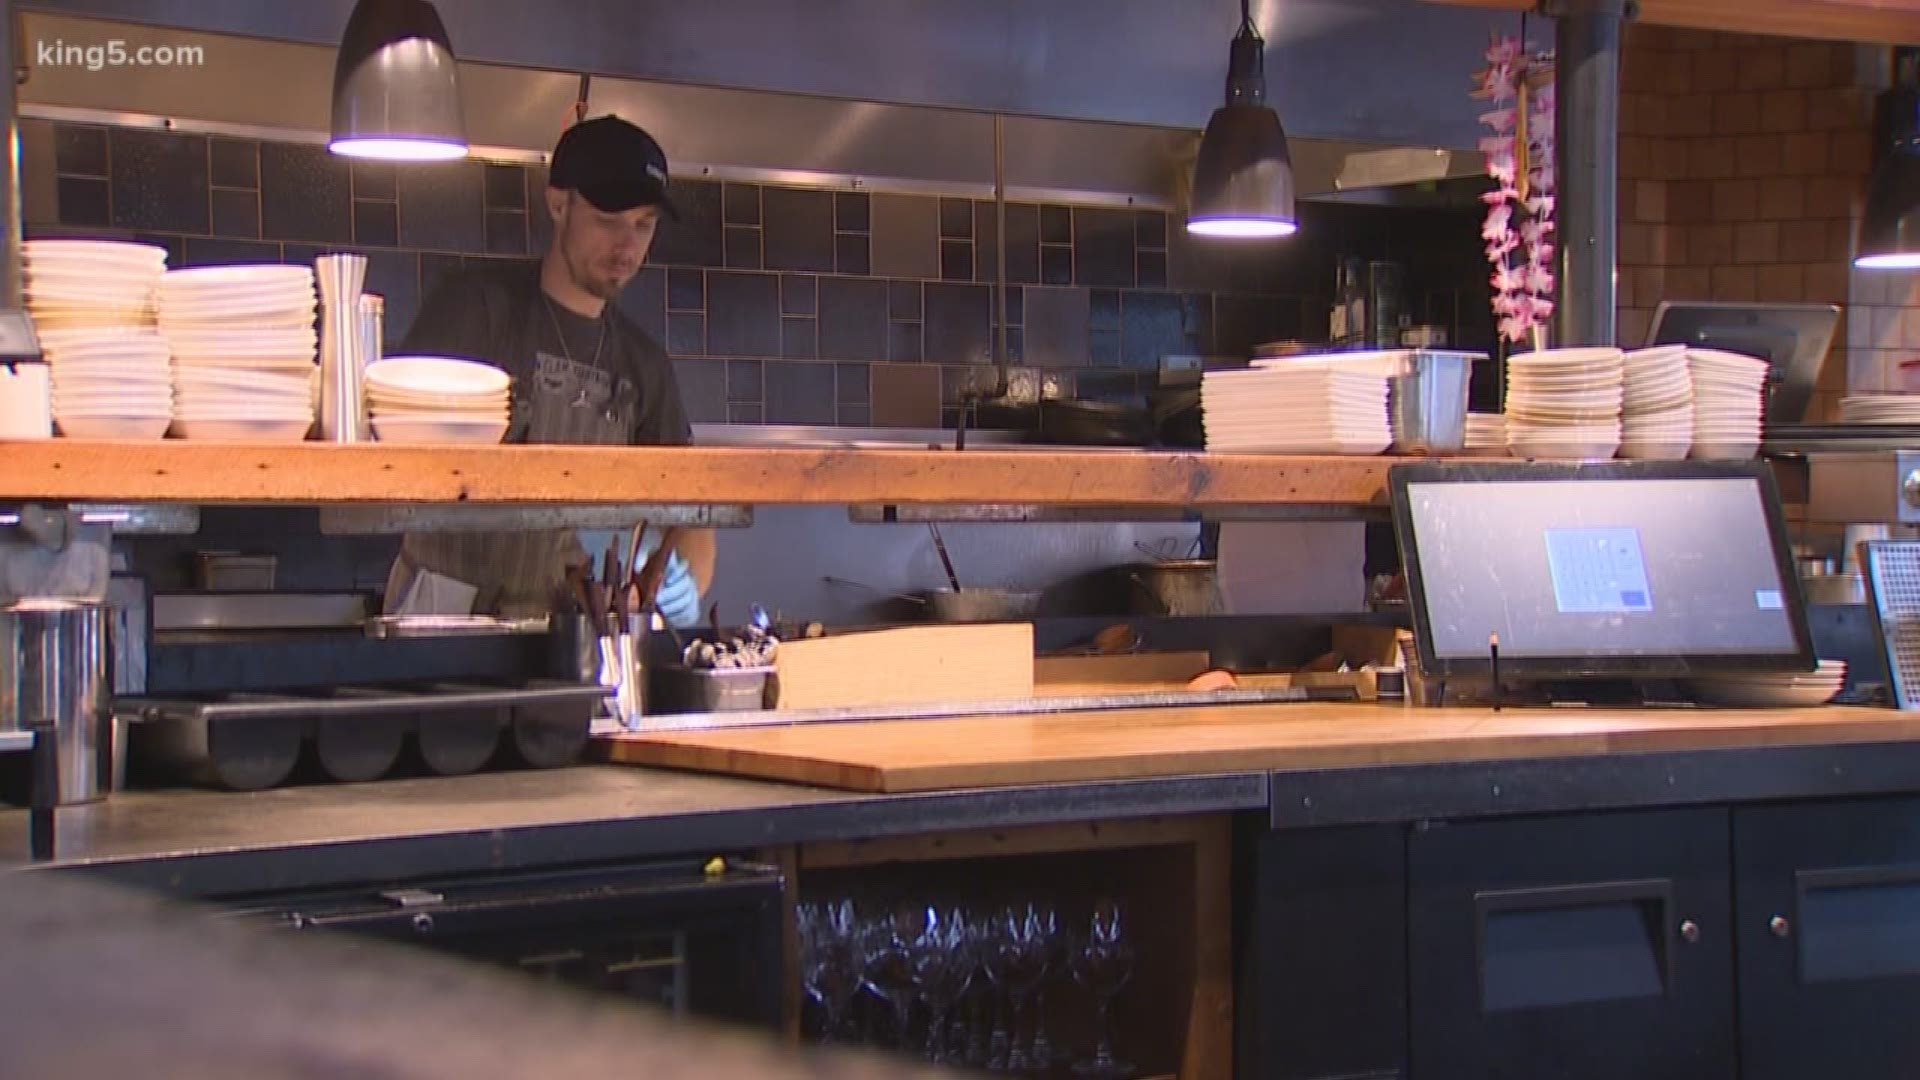 Restaurant owners are having to adjust to keep themselves in business following the city's minimum wage requirements.